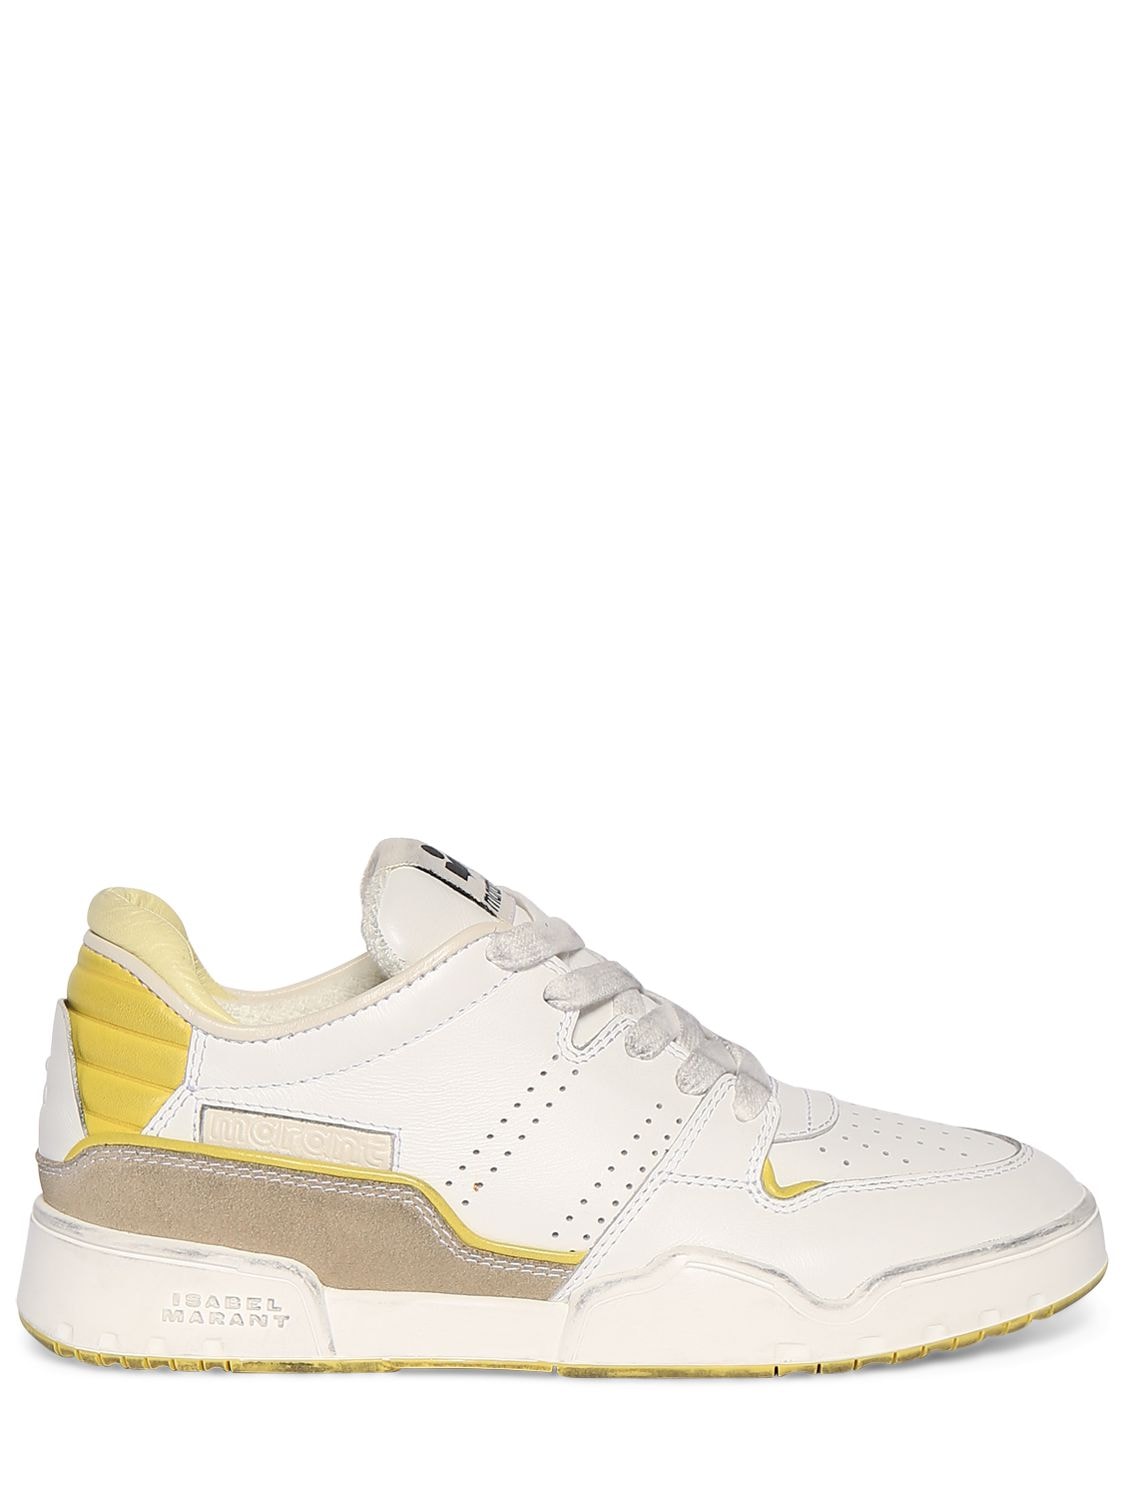 Isabel Marant Emree Leather Sneakers In White,yellow